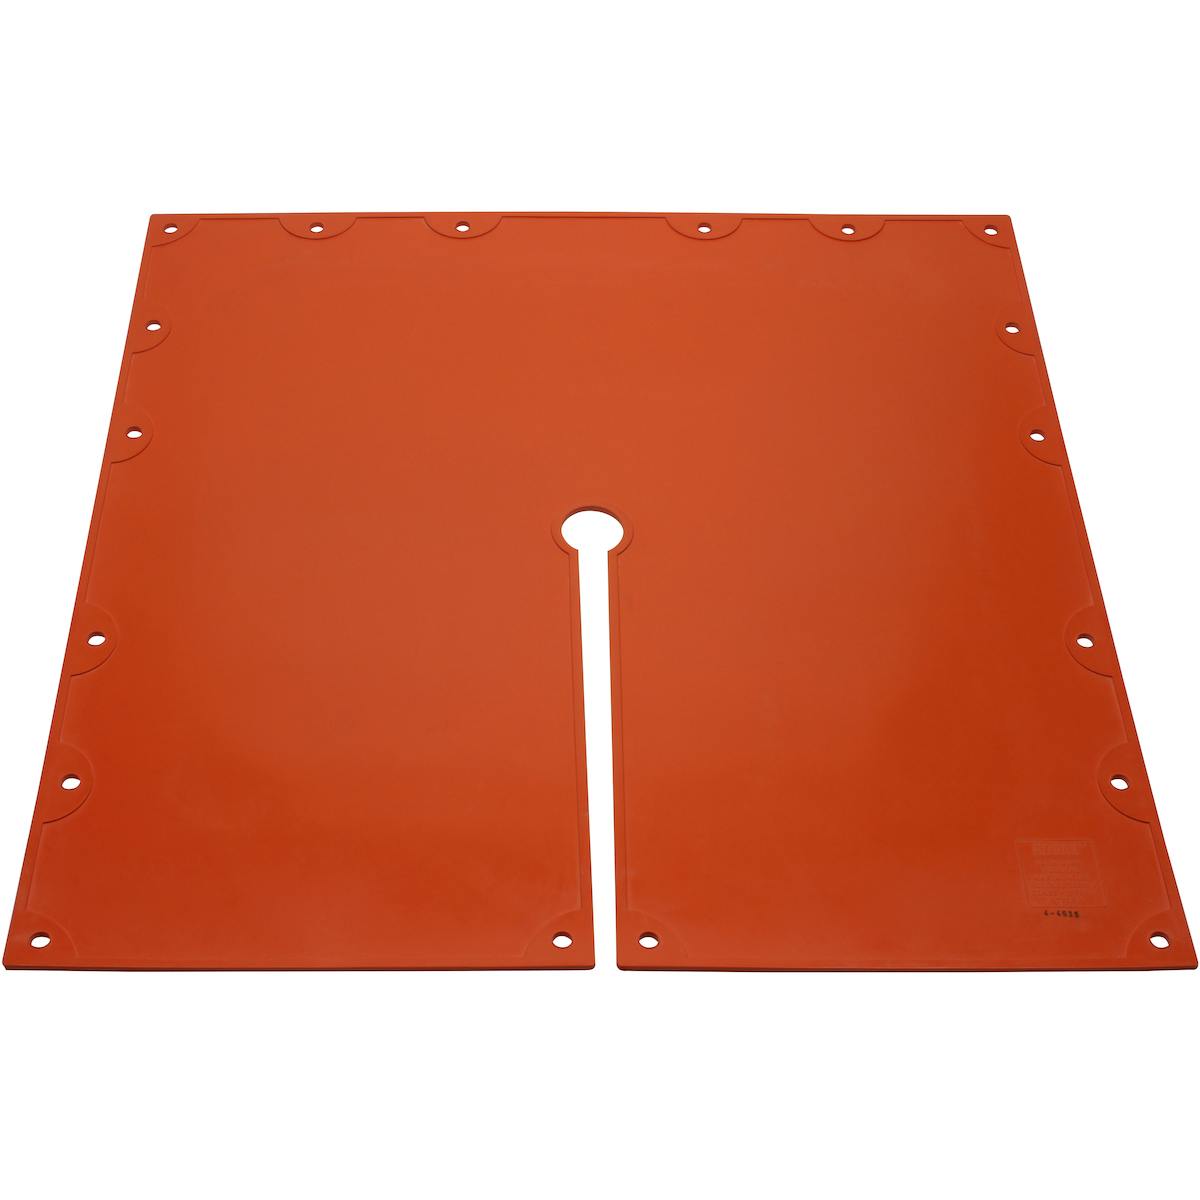 Class 4 Slotted Rubber Insulating Blanket, Orange (188-4) - OS